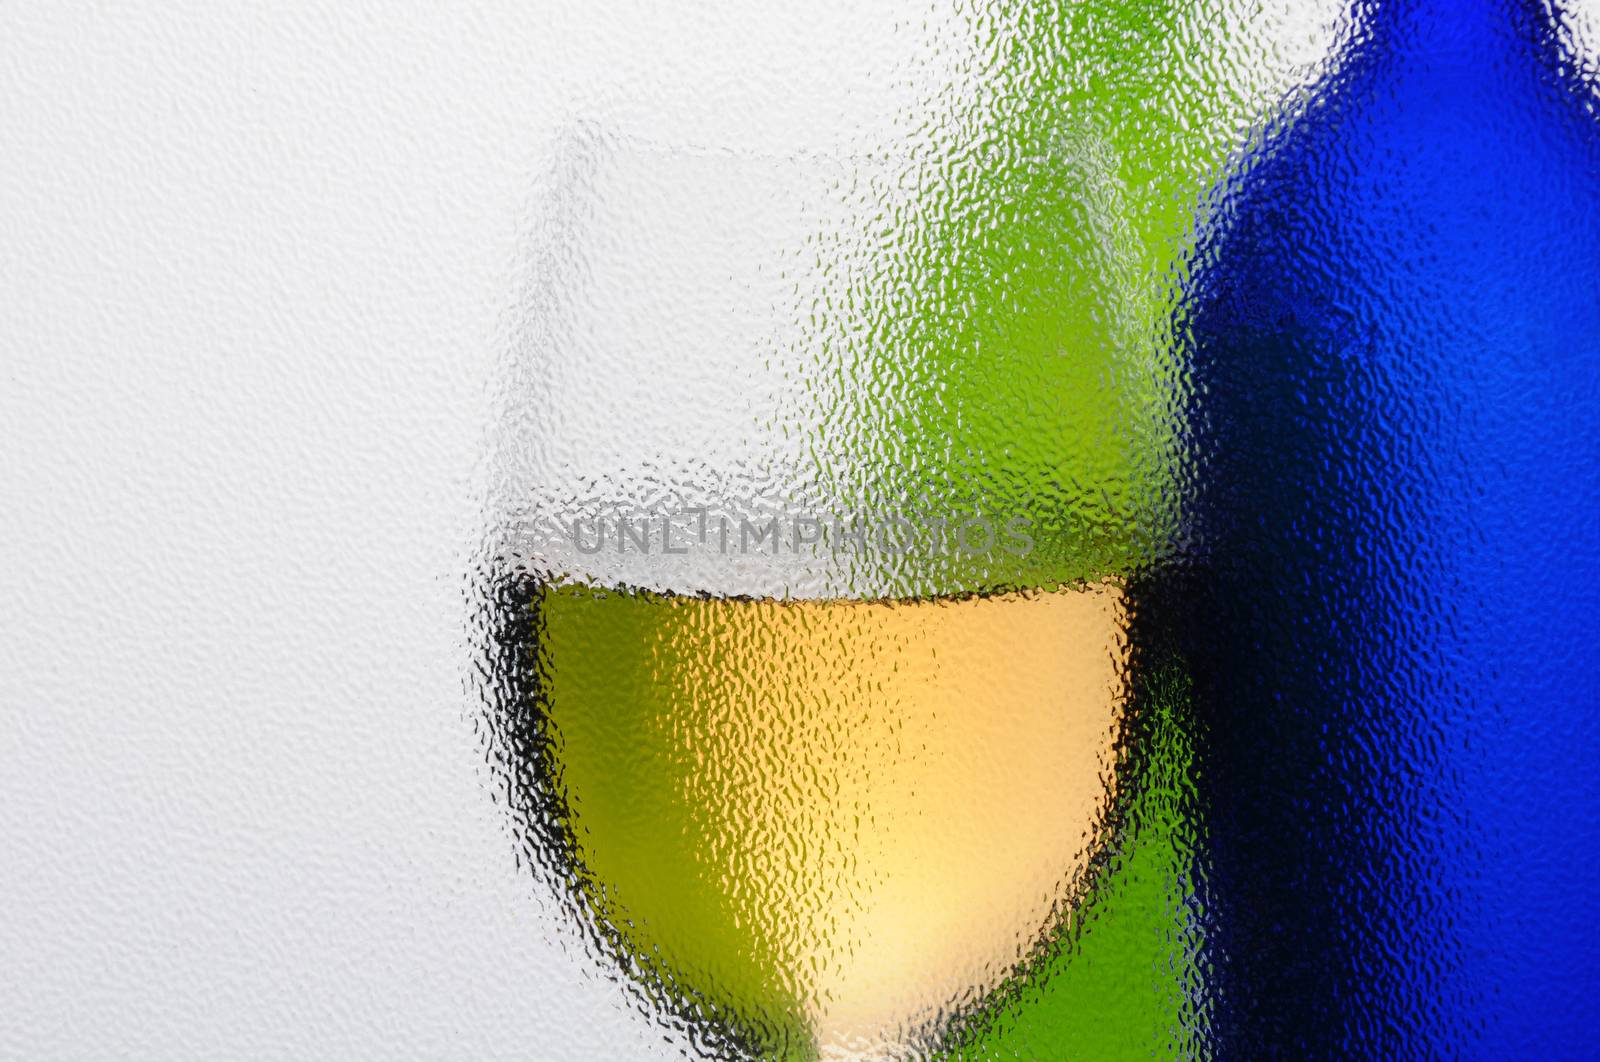 Wine Bottles and Wineglass seen through a textured window with backlight. Horizontal composition with copyspace.